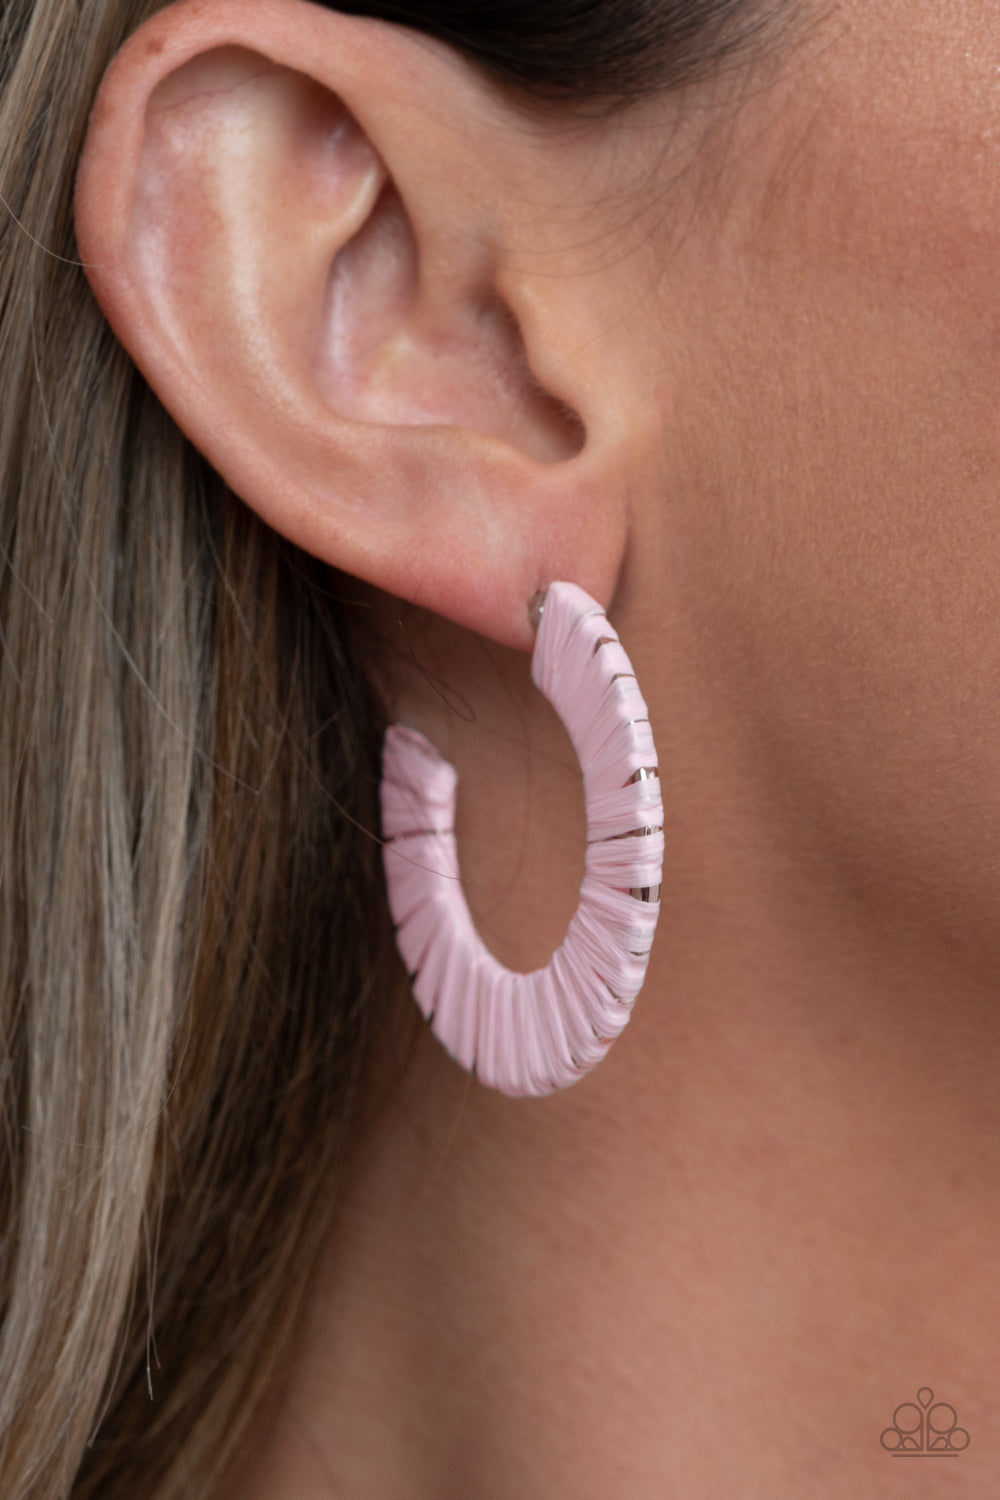 &lt;p&gt;Pink wicker-like cording wraps around a thick silver hoop, creating a flirty pop of color. Earring attaches to a standard post fitting. Hoop measures approximately 1 1/2\&quot; in diameter. &lt;/p&gt;  

&lt;p&gt; &lt;i&gt;  Sold as one pair of hoop earrings. &lt;/i&gt;  &lt;/p&gt;


